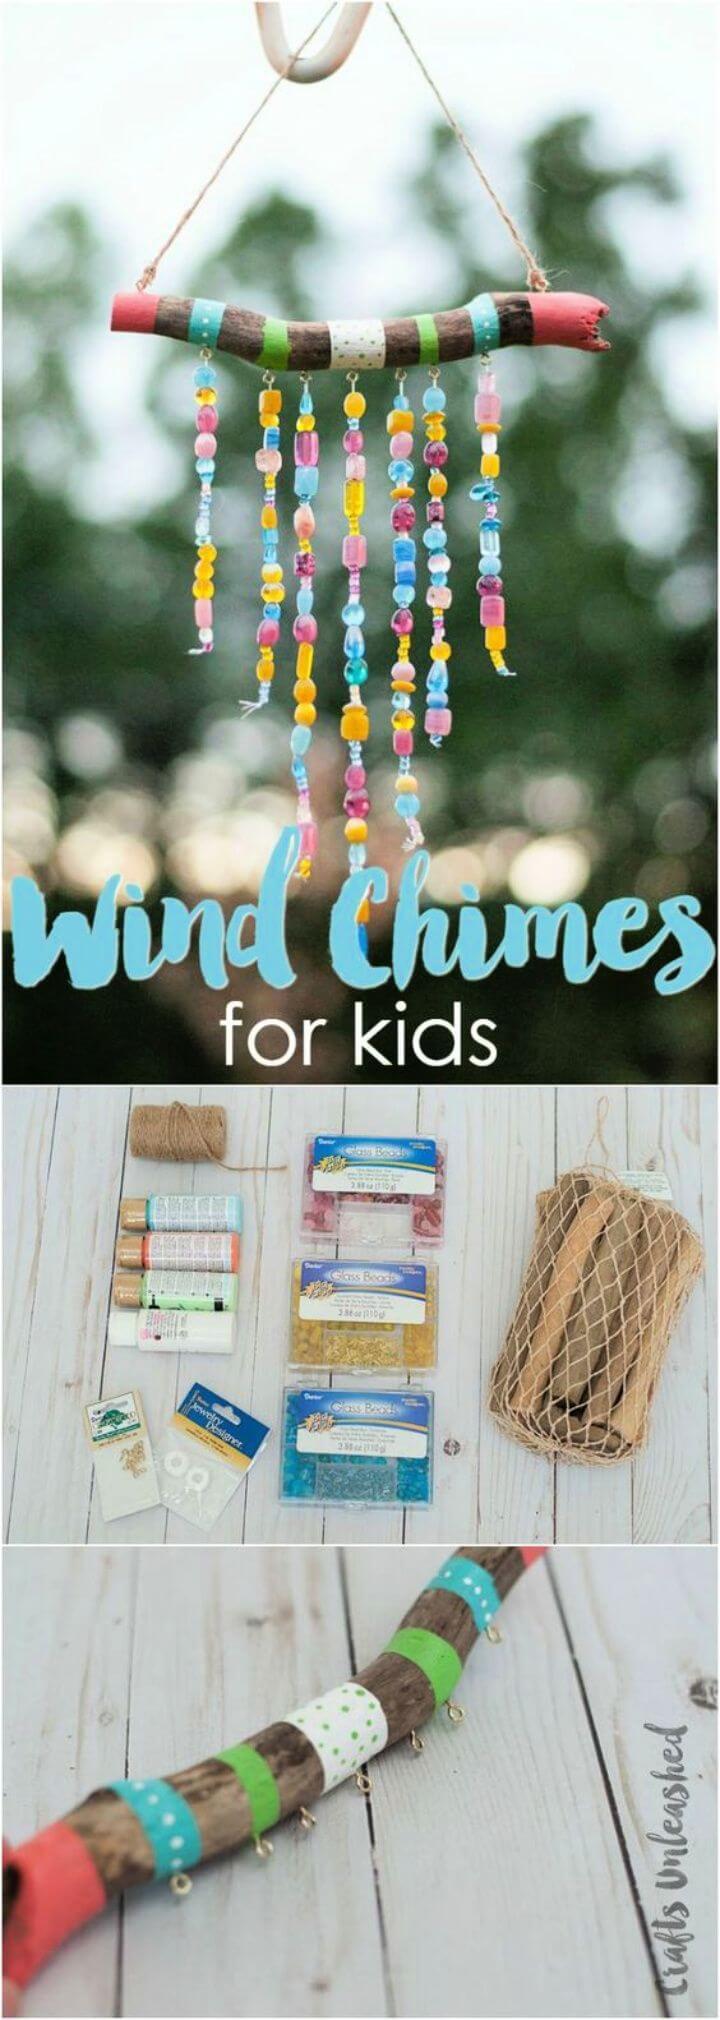 DIY Wind Chimes For Kids Step by Step